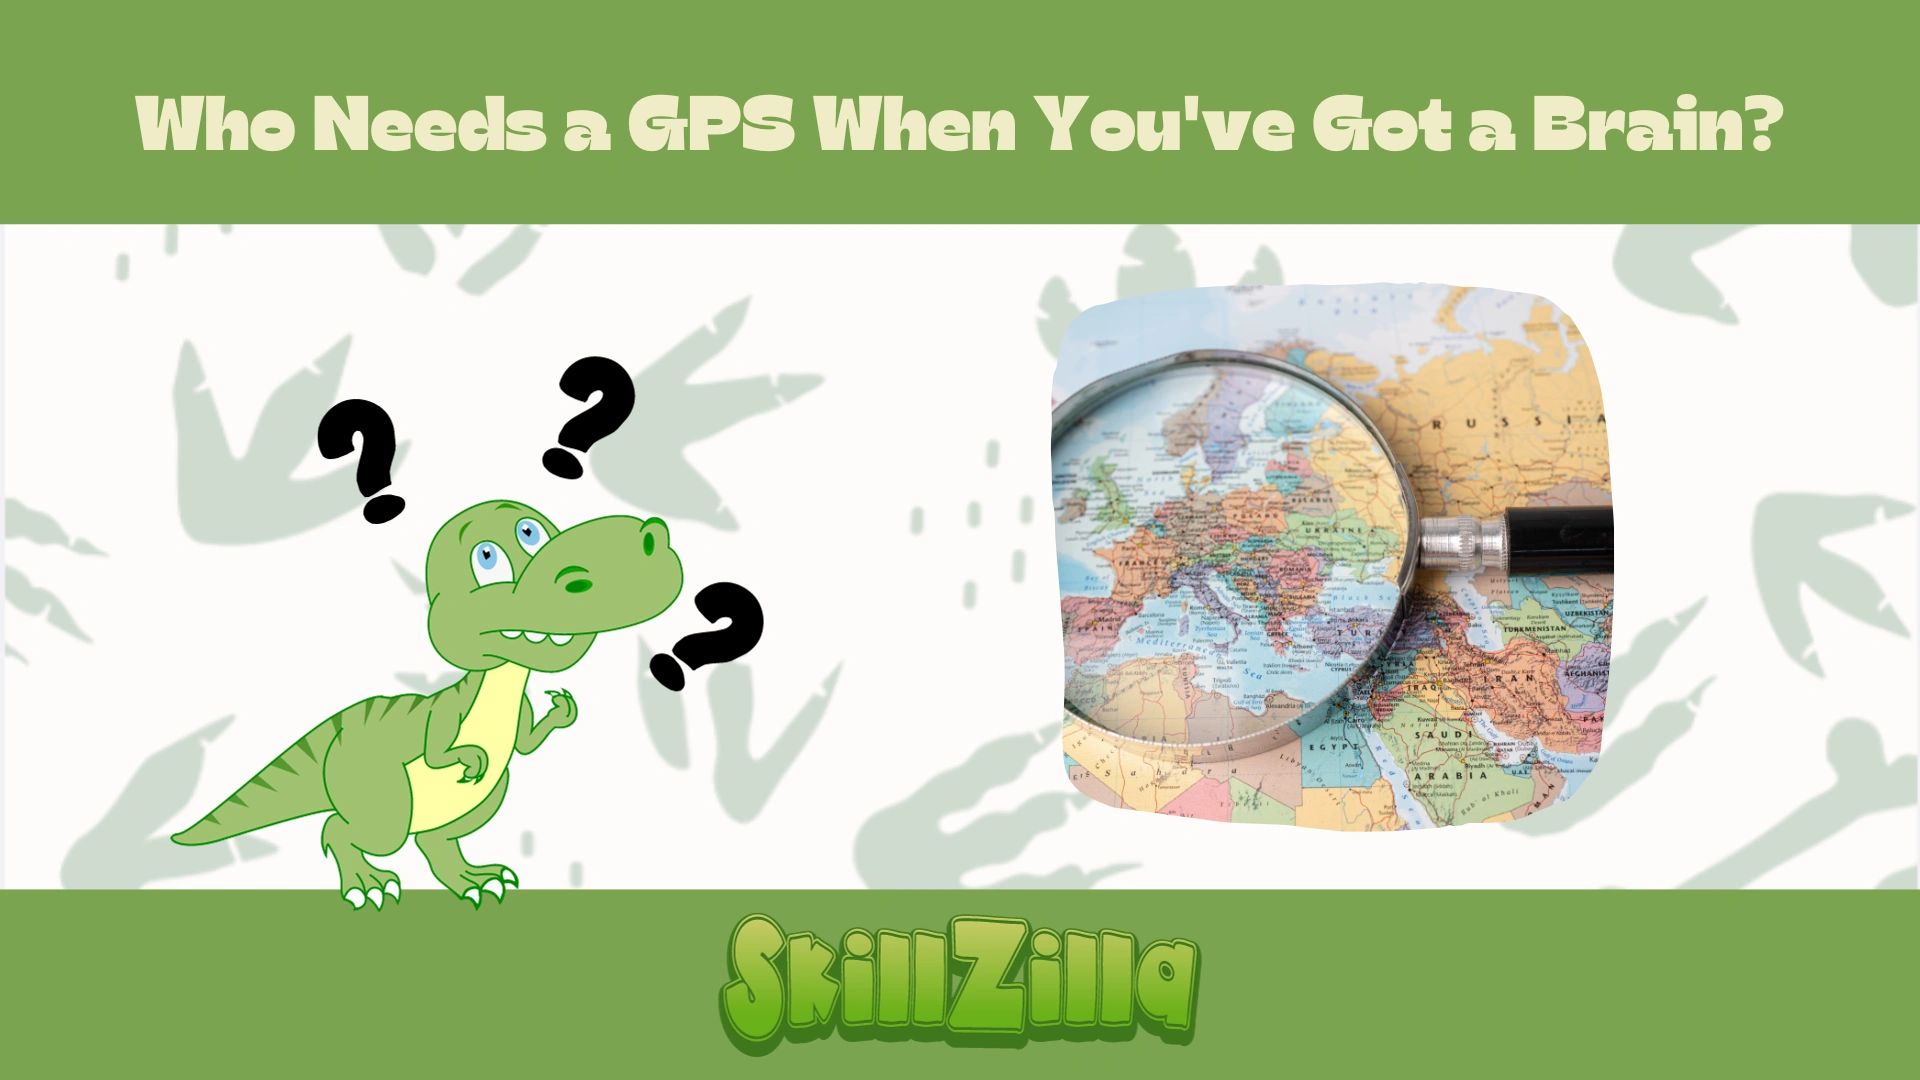 Image of a cartoon green t-rex looking confused with black question marks above its head, with a paper map next to the t-rex, text reads Why Needs GPS when you've got a brain